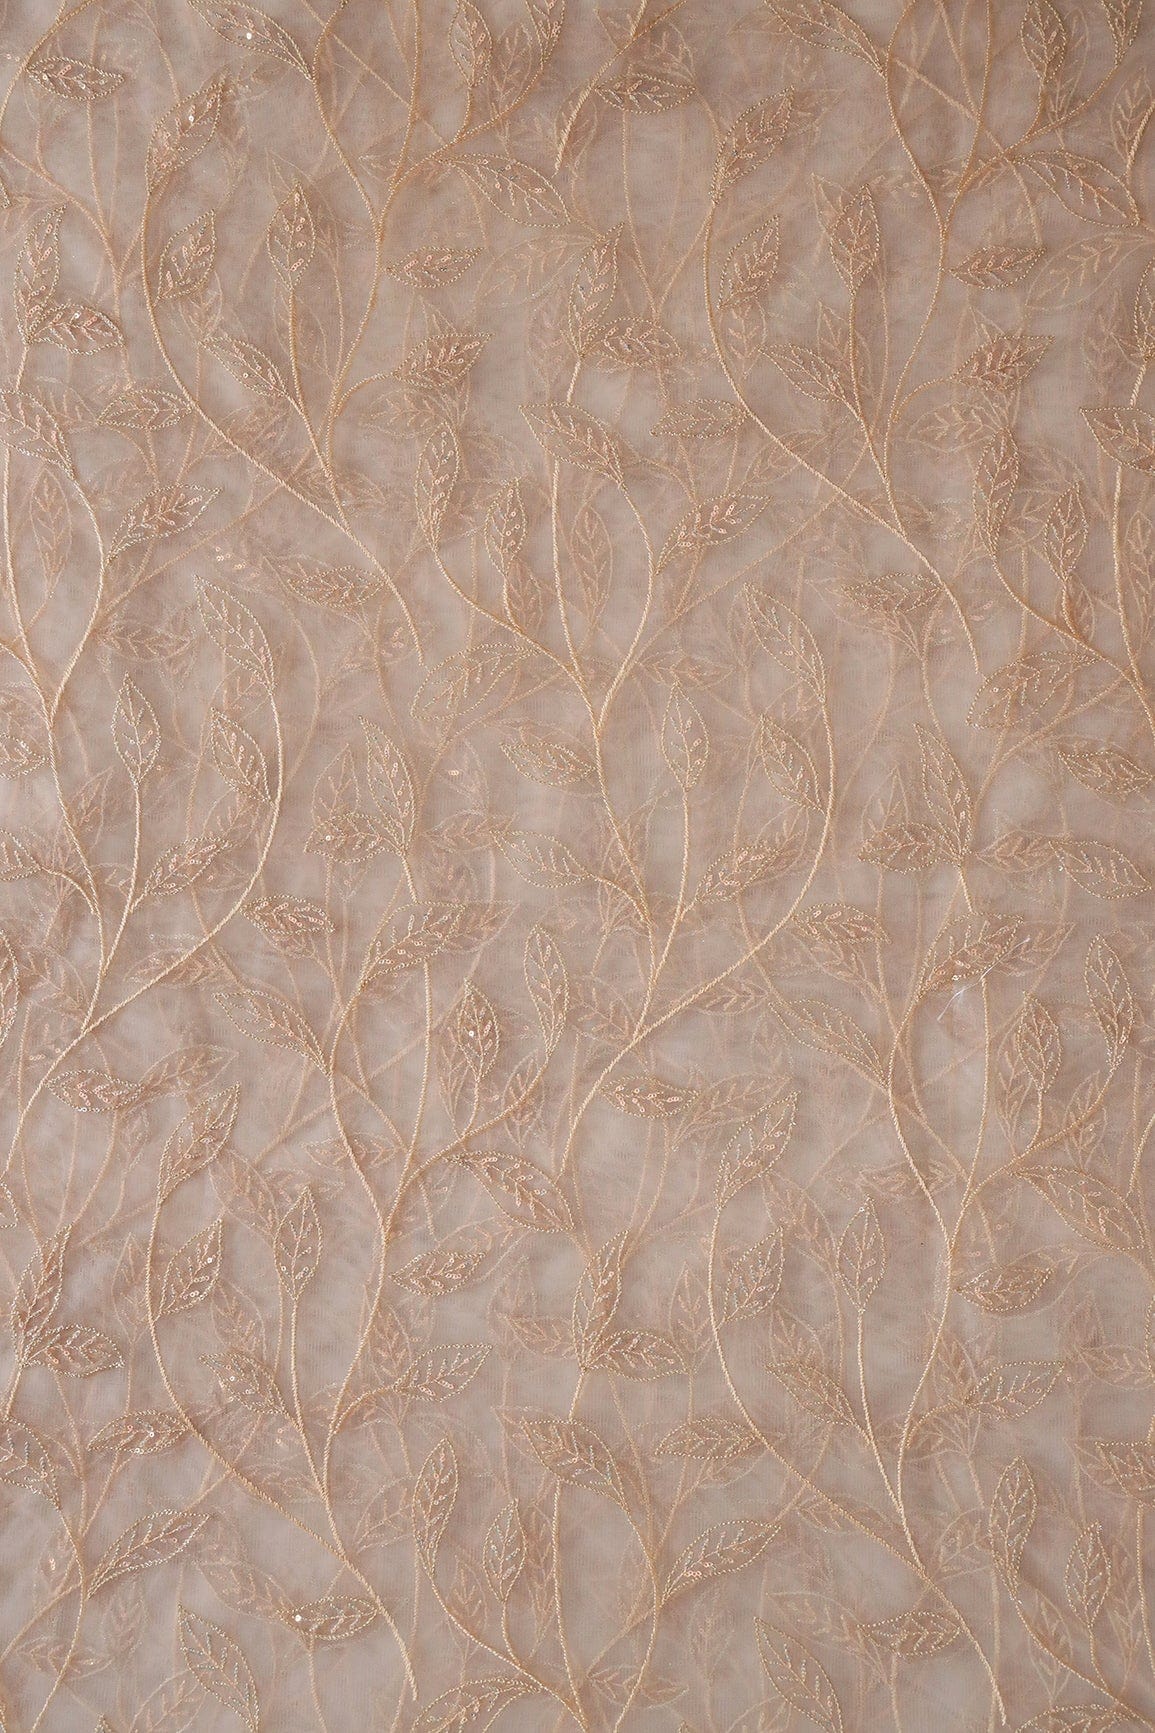 doeraa Embroidery Fabrics Beige Thread With Sequins Beautiful Leafy Embroidery On Cream Soft Net Fabric